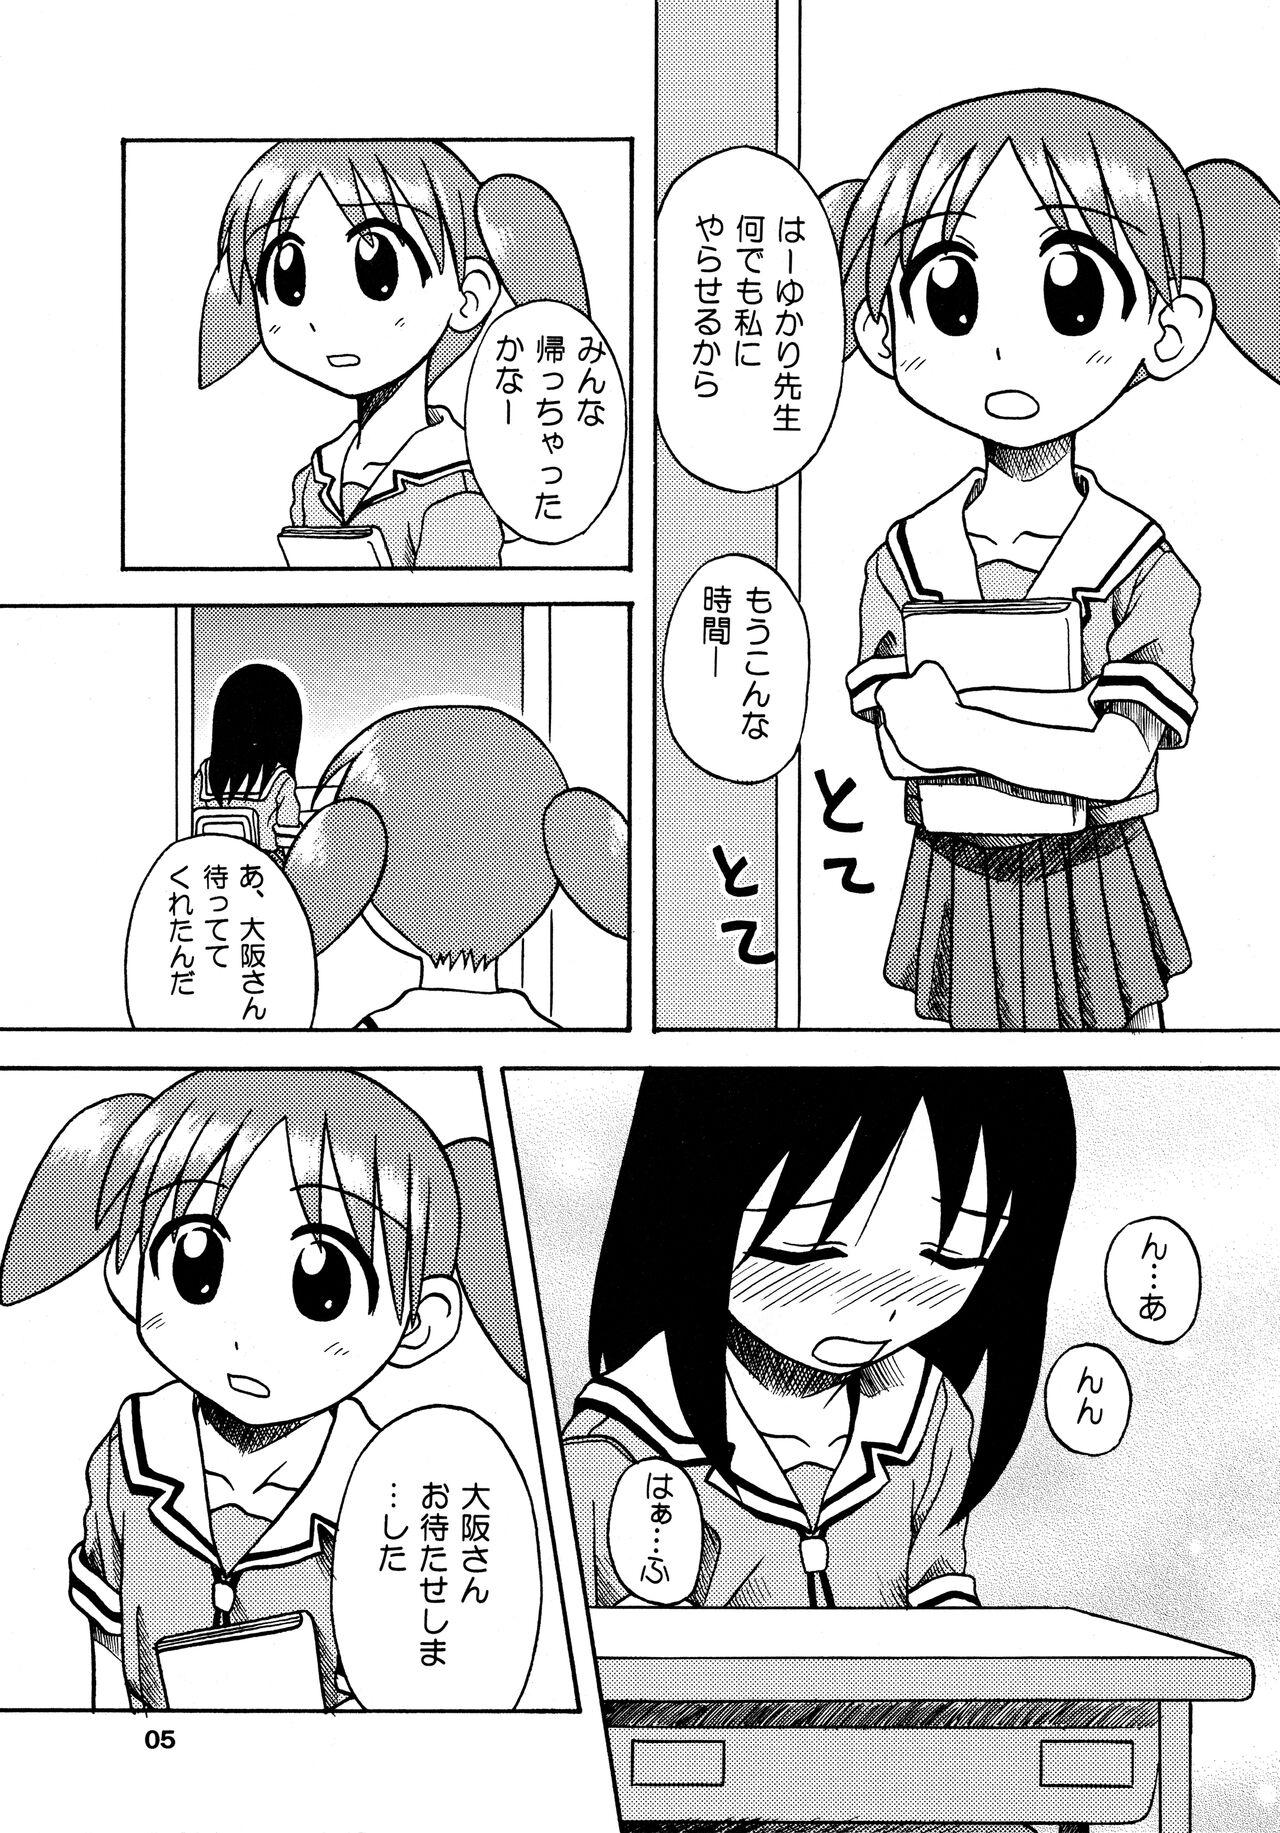 Soapy ANOTHER LIFE - Azumanga daioh Sexo - Page 5